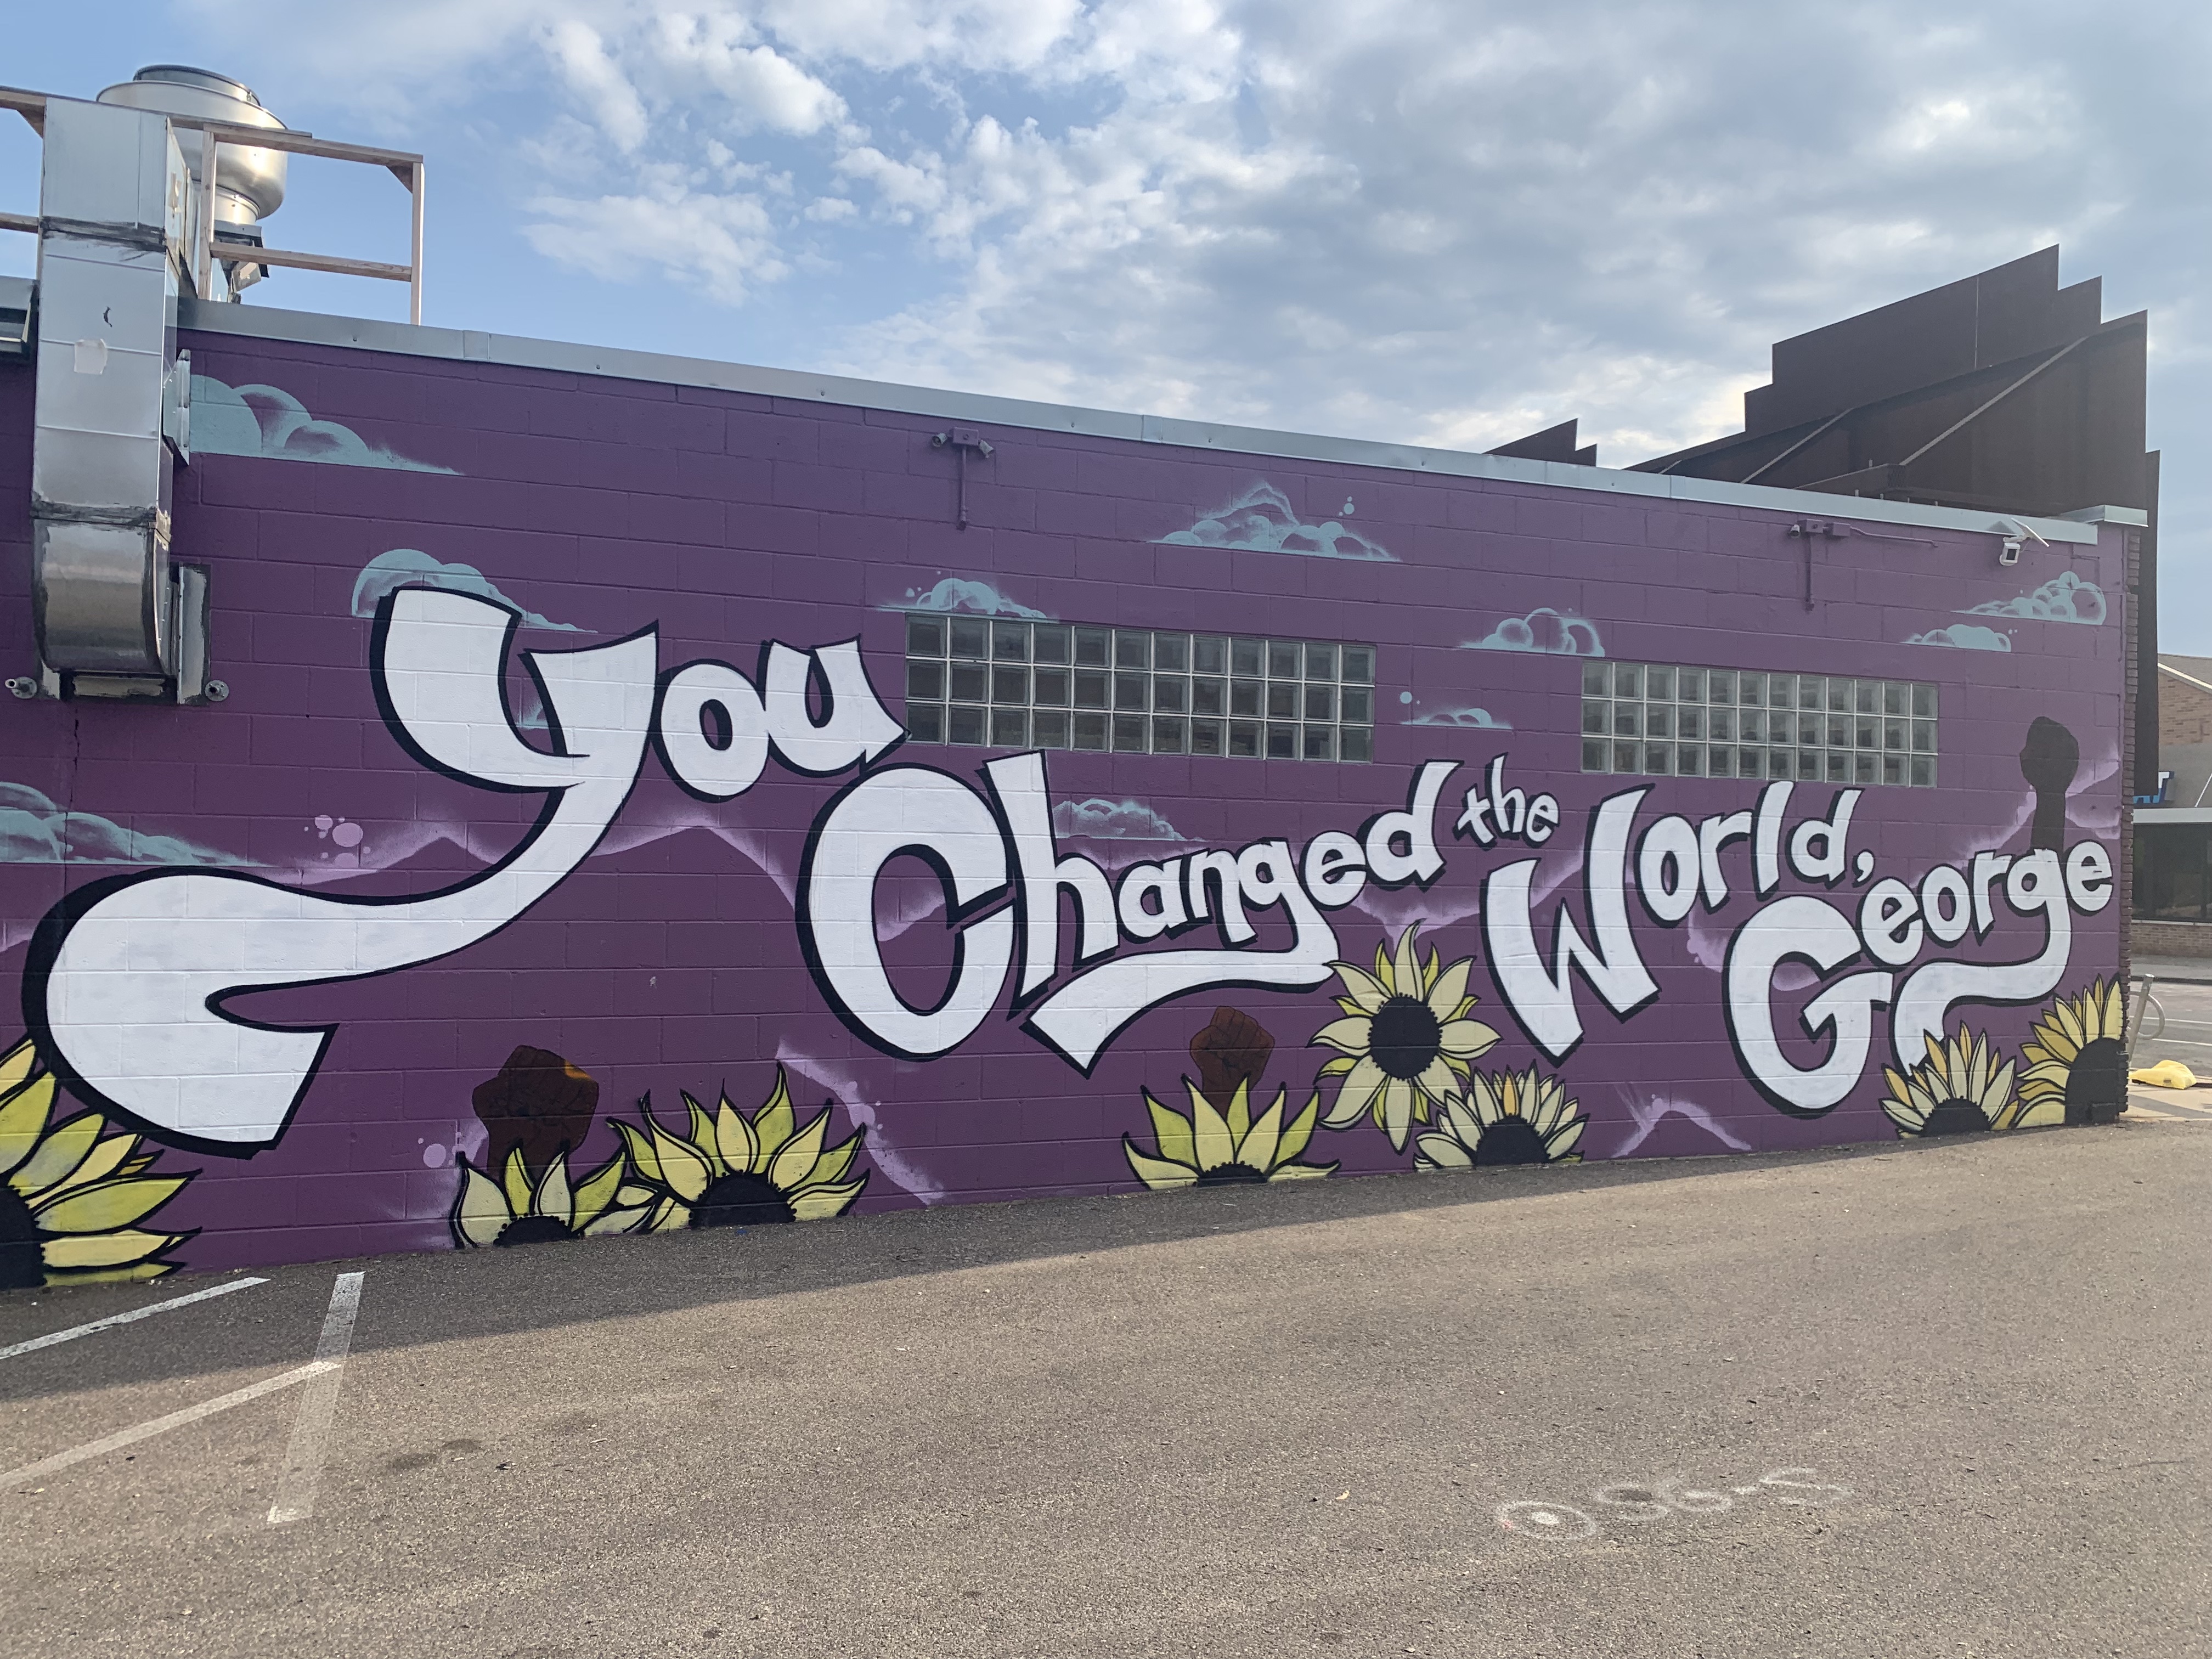 Mural reads: "You changed the world, George"